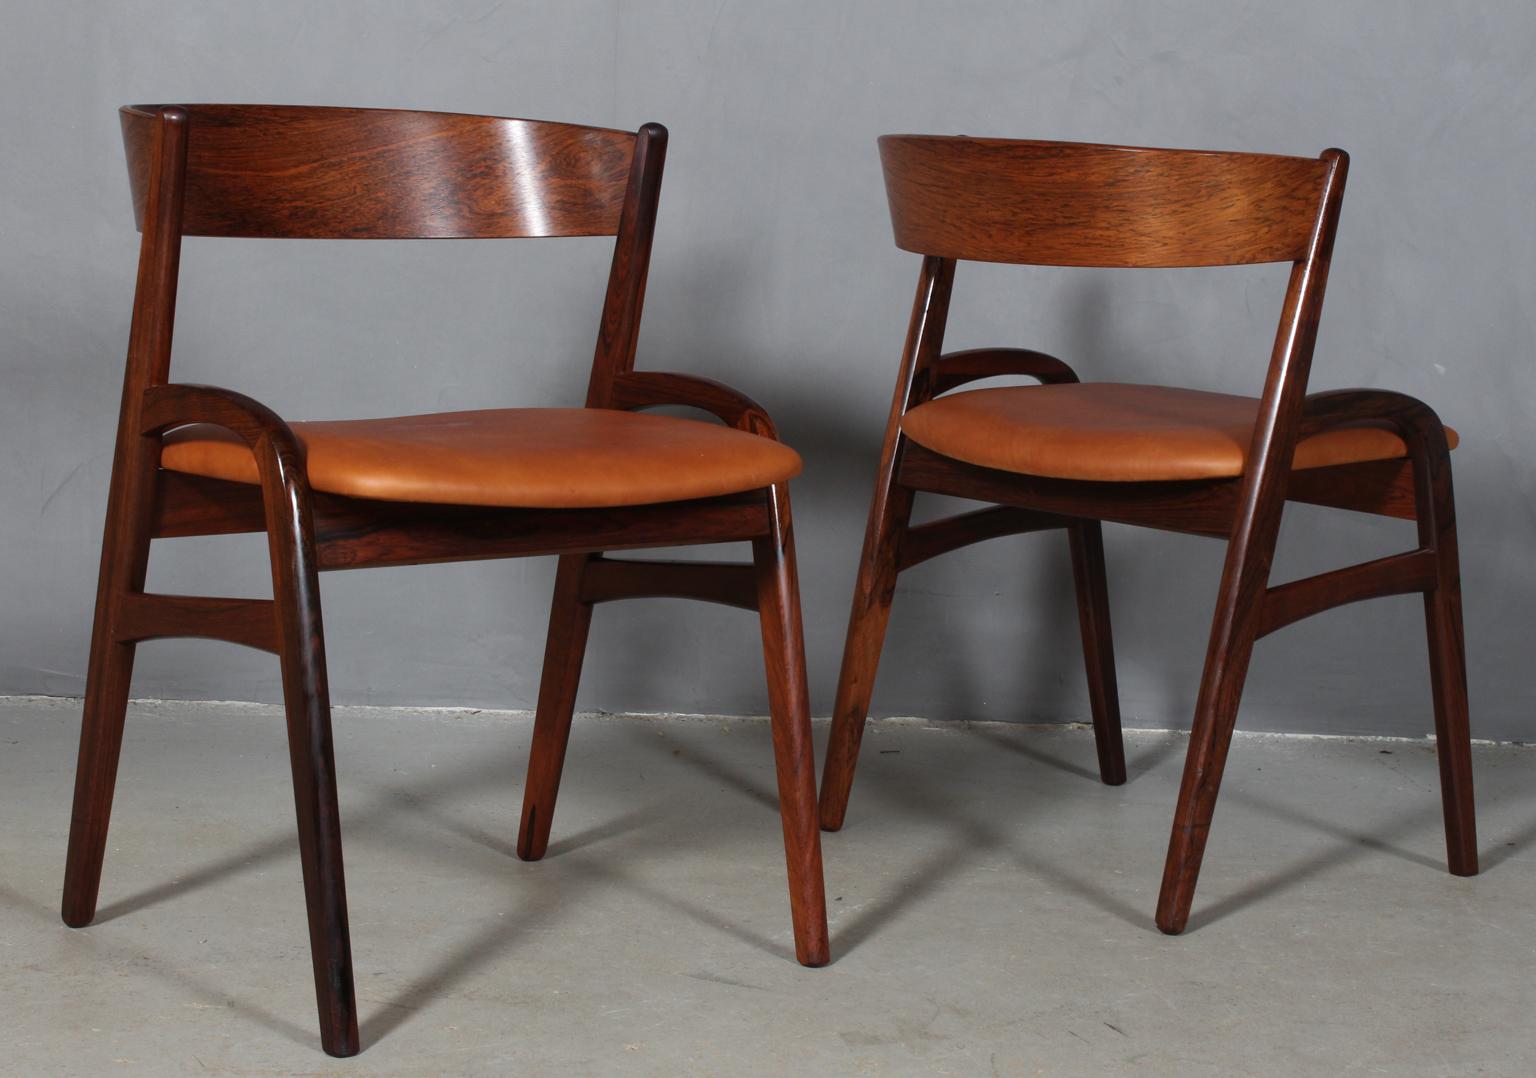 Mid-20th Century Danish Cabinetmaker, Set of Four Chairs